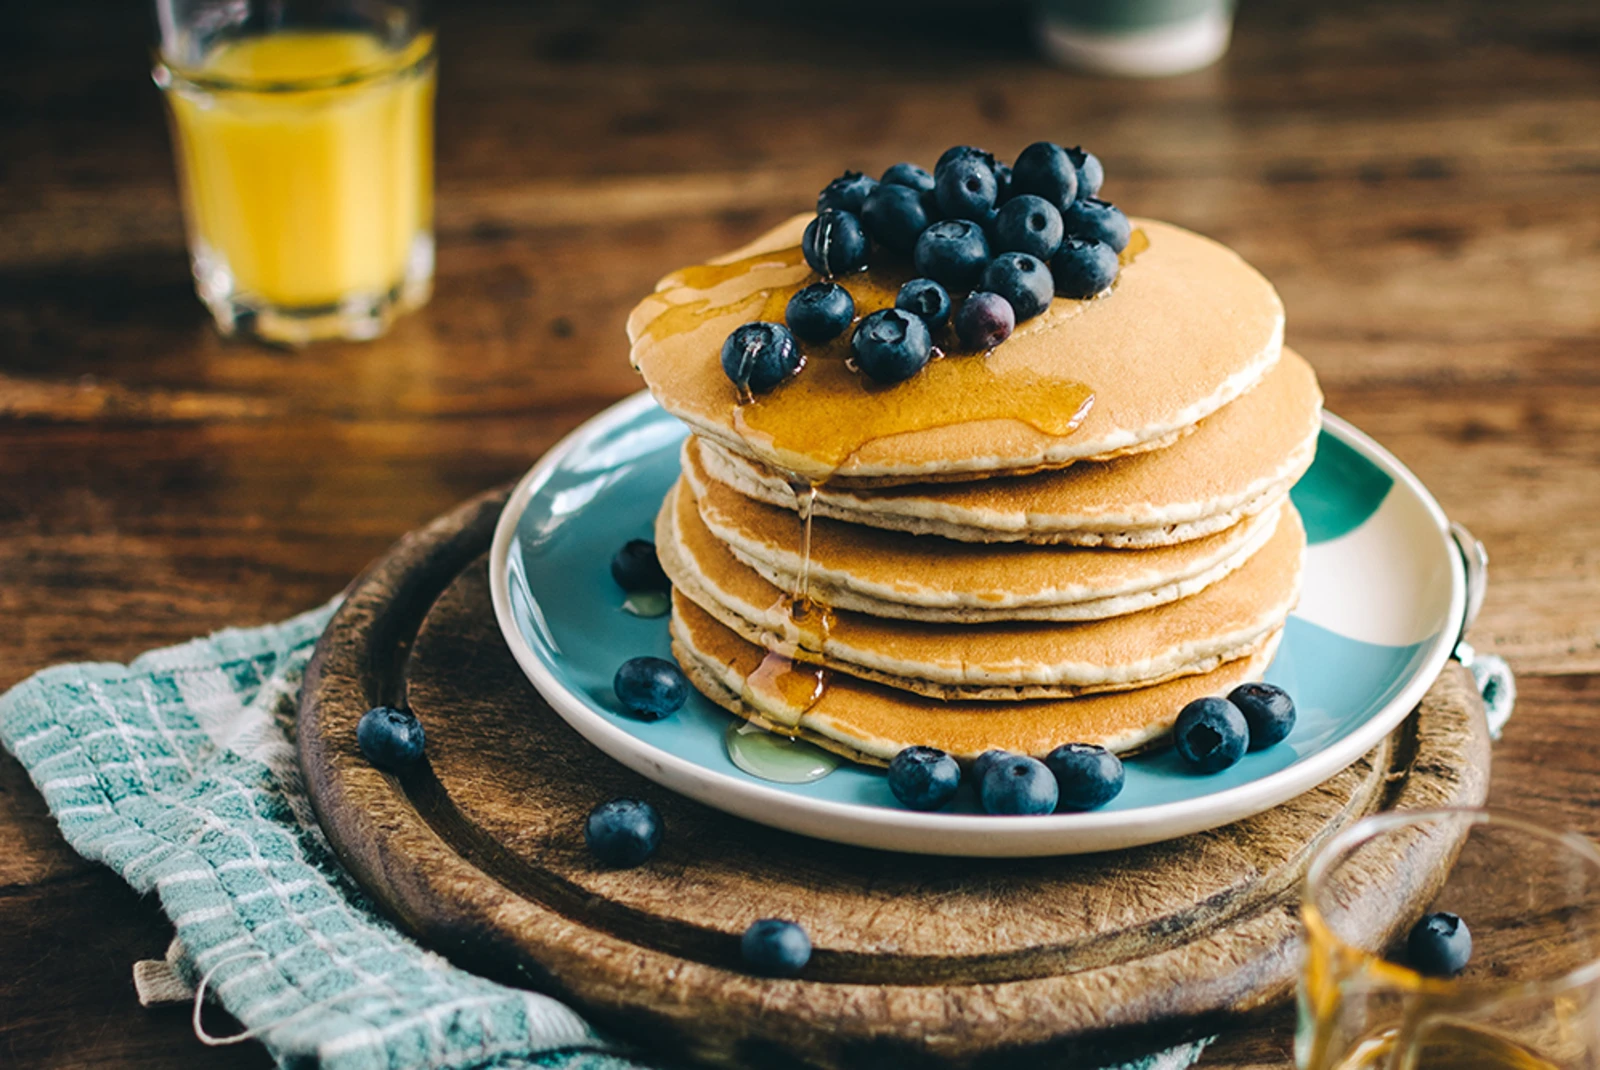 stack of five golden pancakes with blueberries and maple syrup on a blue plate and wooden platter orange juice in clear glass